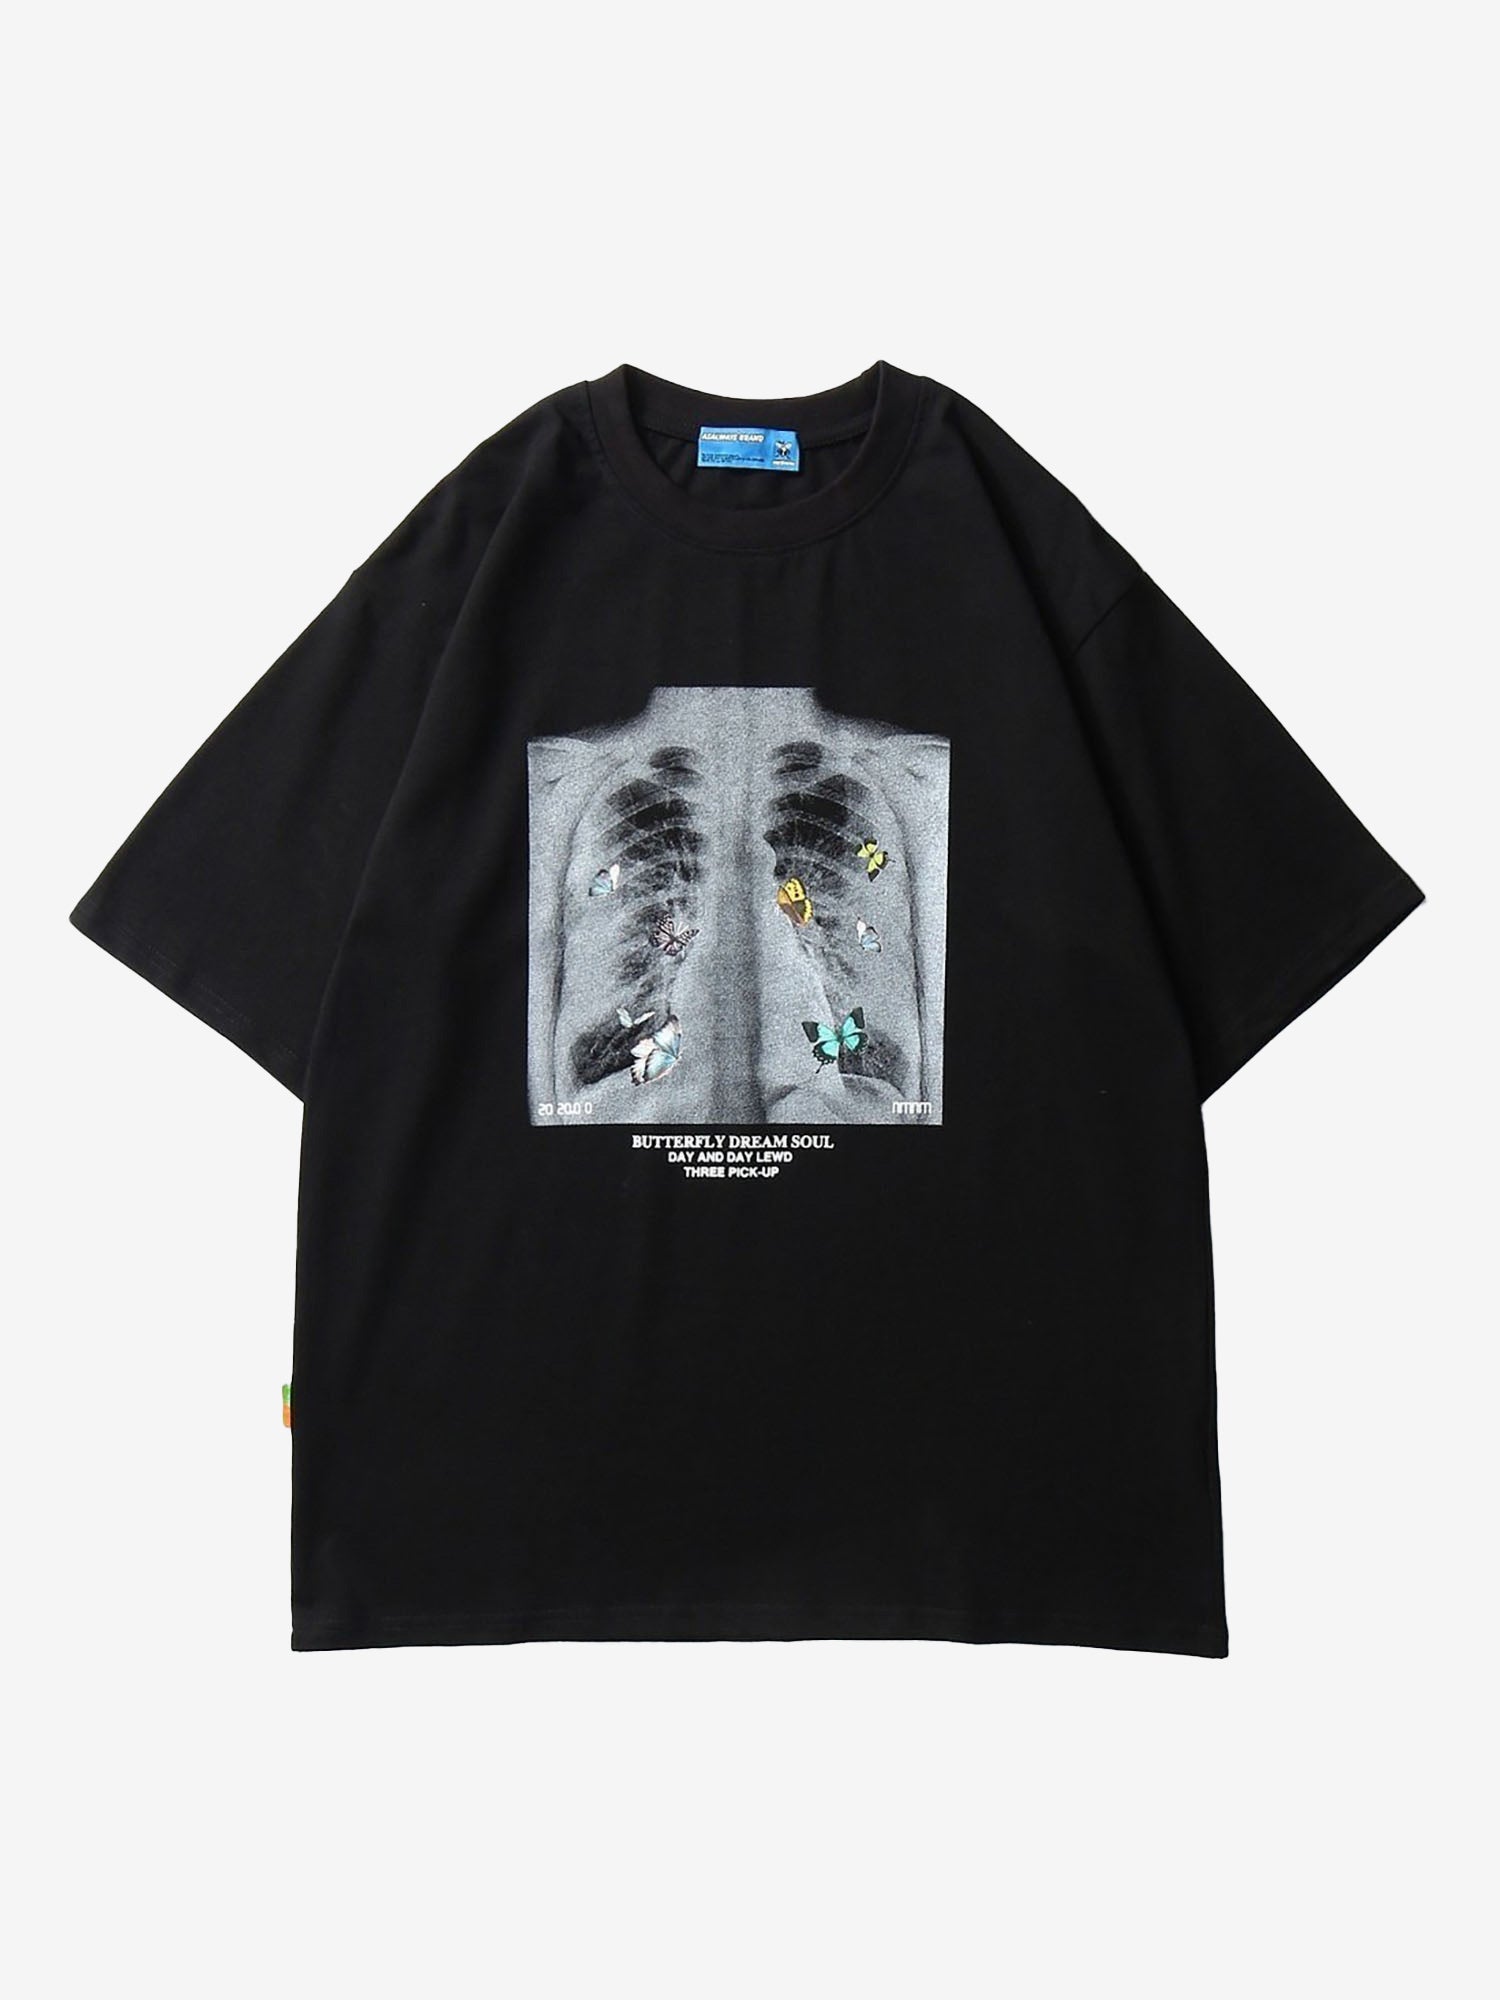 JUSTNOTAG X-ray Chest Perspective Short Sleeve Tee